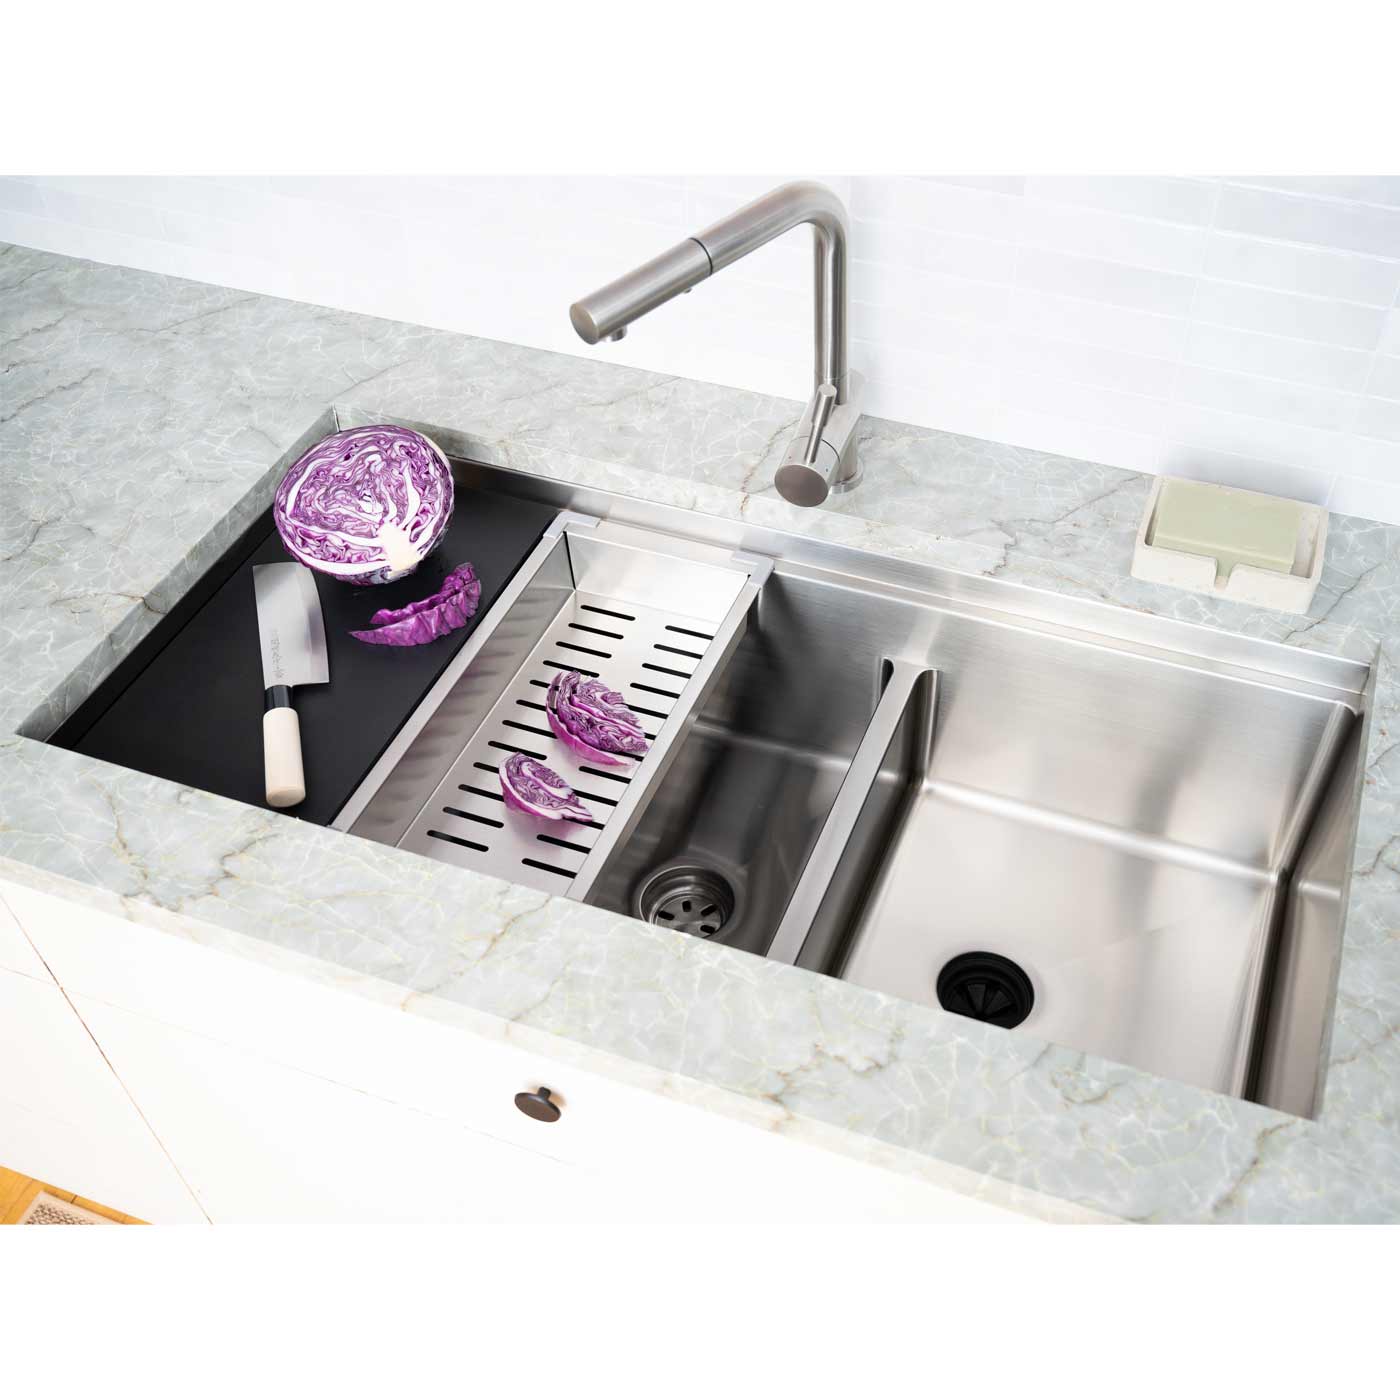 39 inch double basin workstation sink with half inch radius corners, reversible design, and seamless drain feature